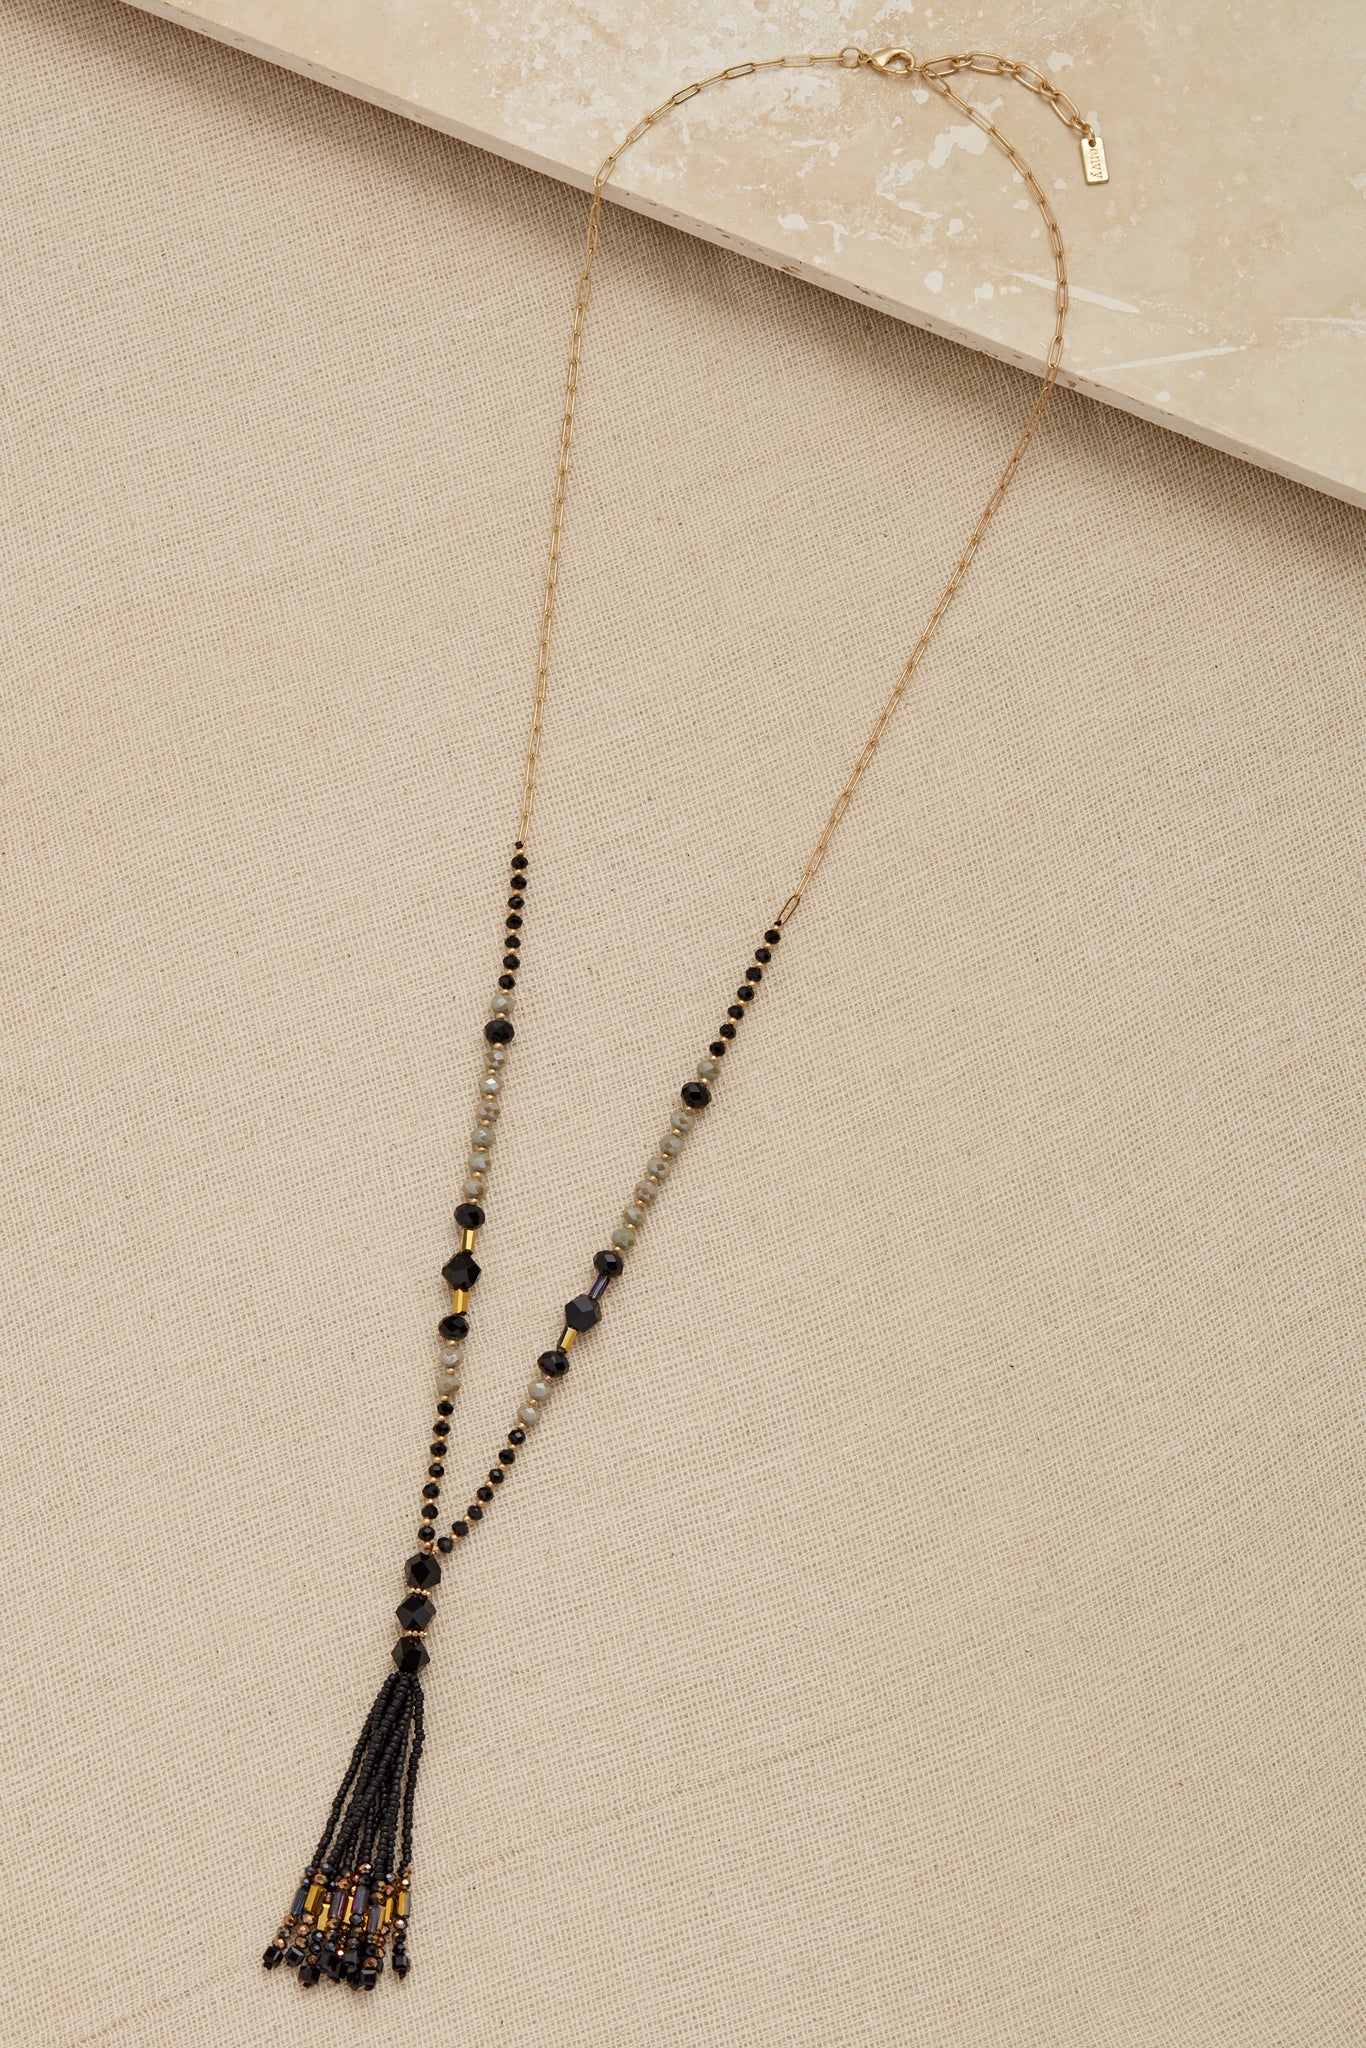 Long Gold and Black Necklace with Beaded Tassel